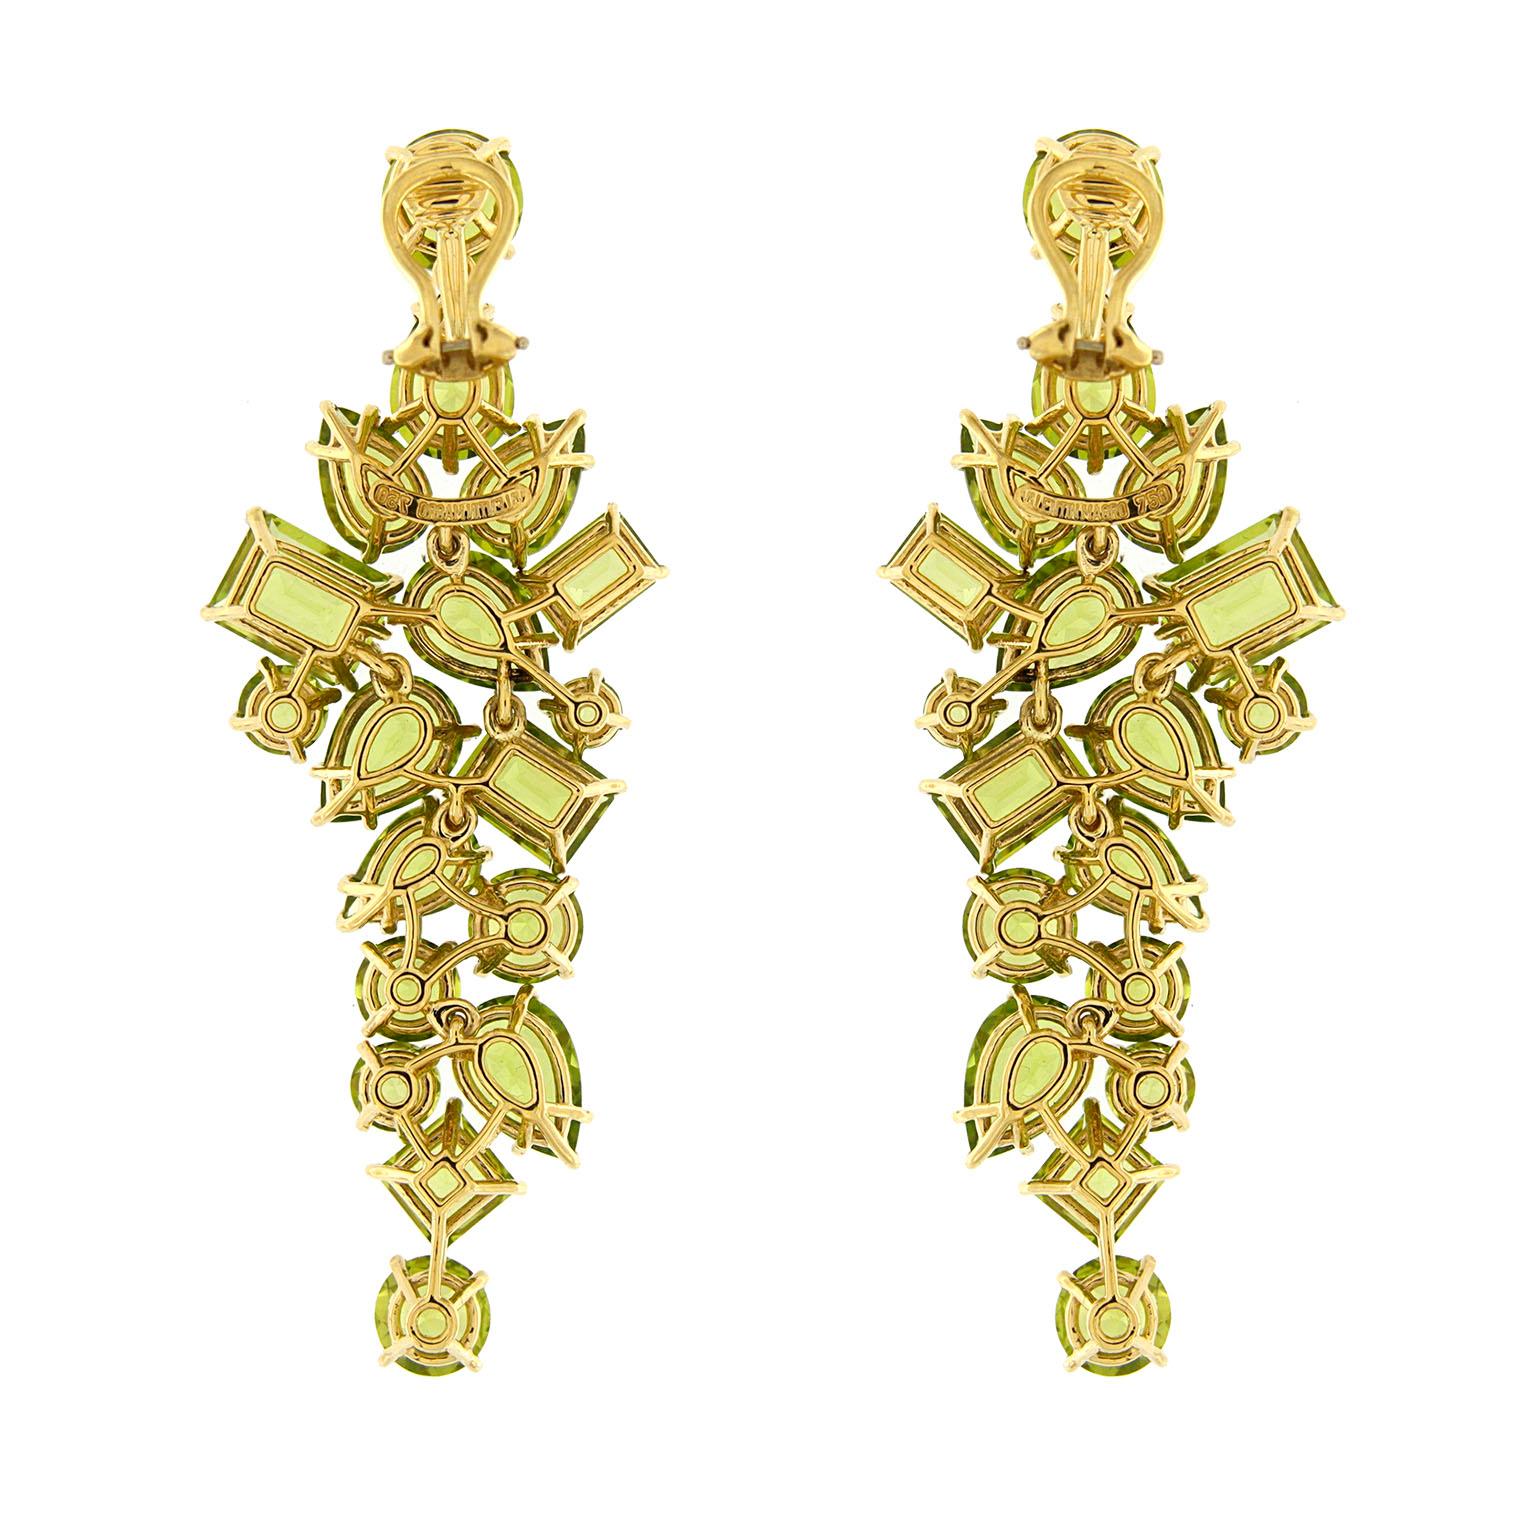 A torrent of light and warmth is created from these peridot drop earrings. The design begins and ends with a single round peridot. In between is a sparkling assortment of pear, emerald, square and round shaped cuts of the gem for a widening